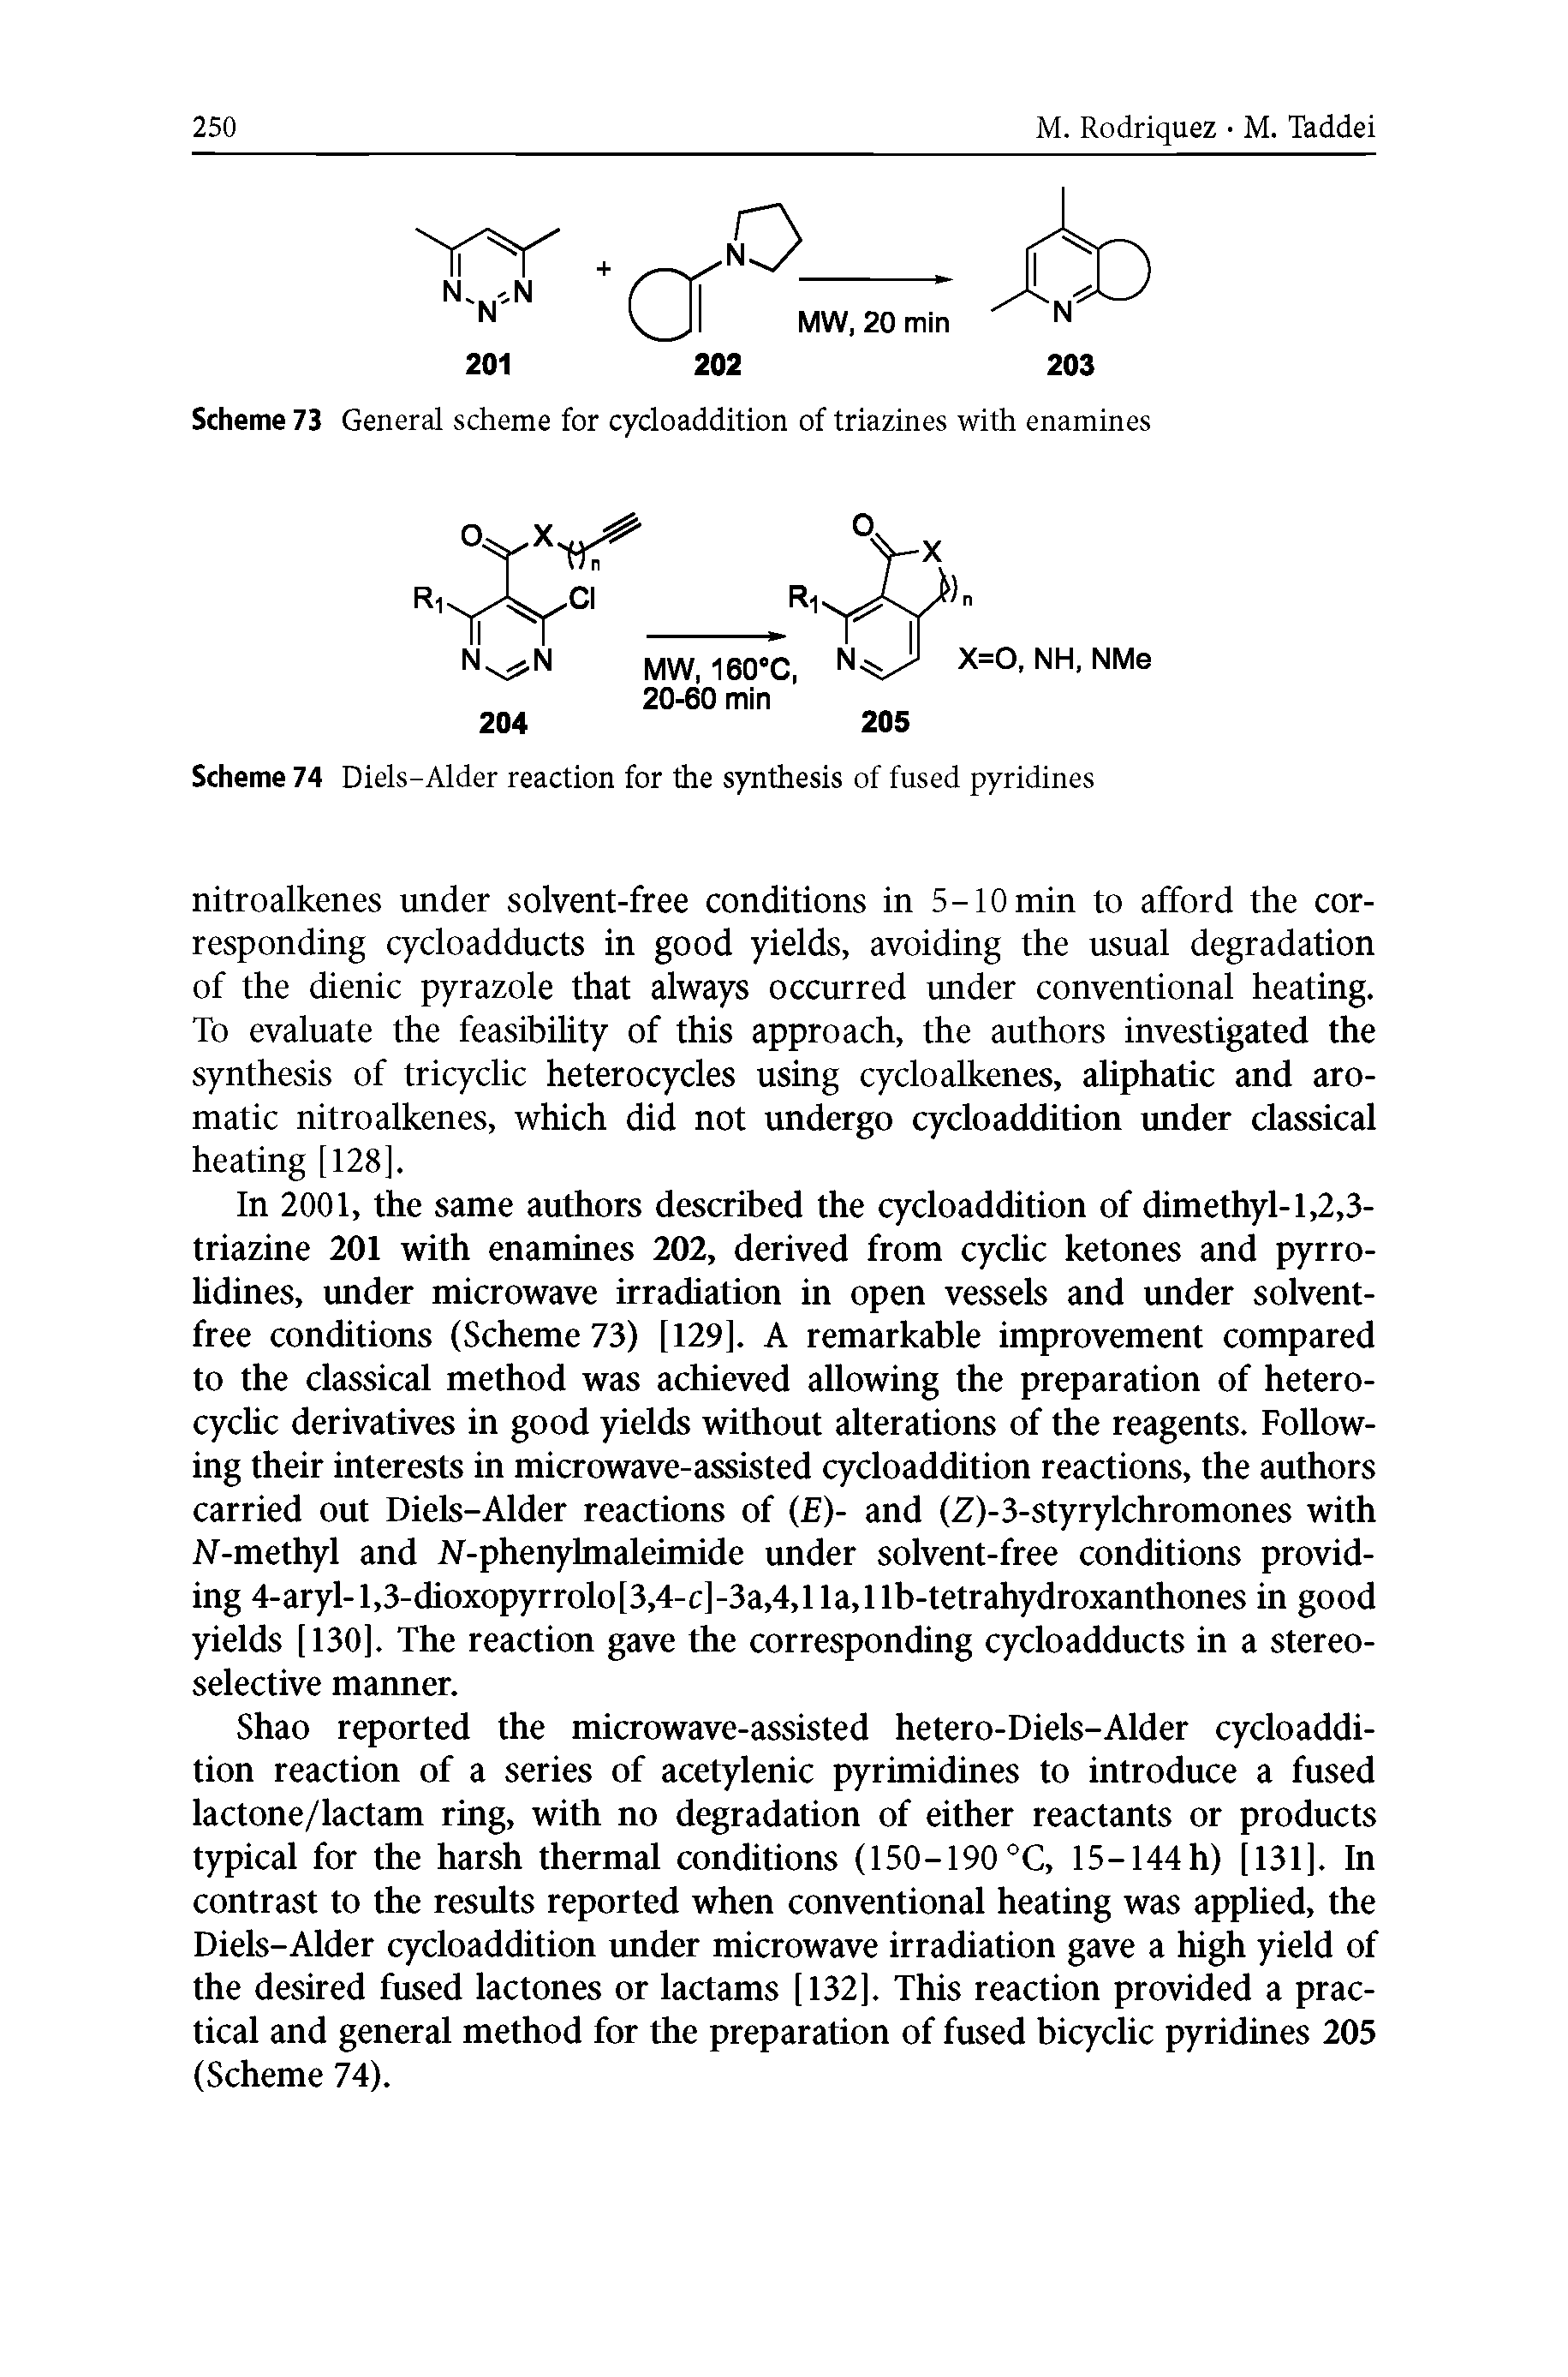 Scheme 74 Diels-Alder reaction for the synthesis of fused pyridines...